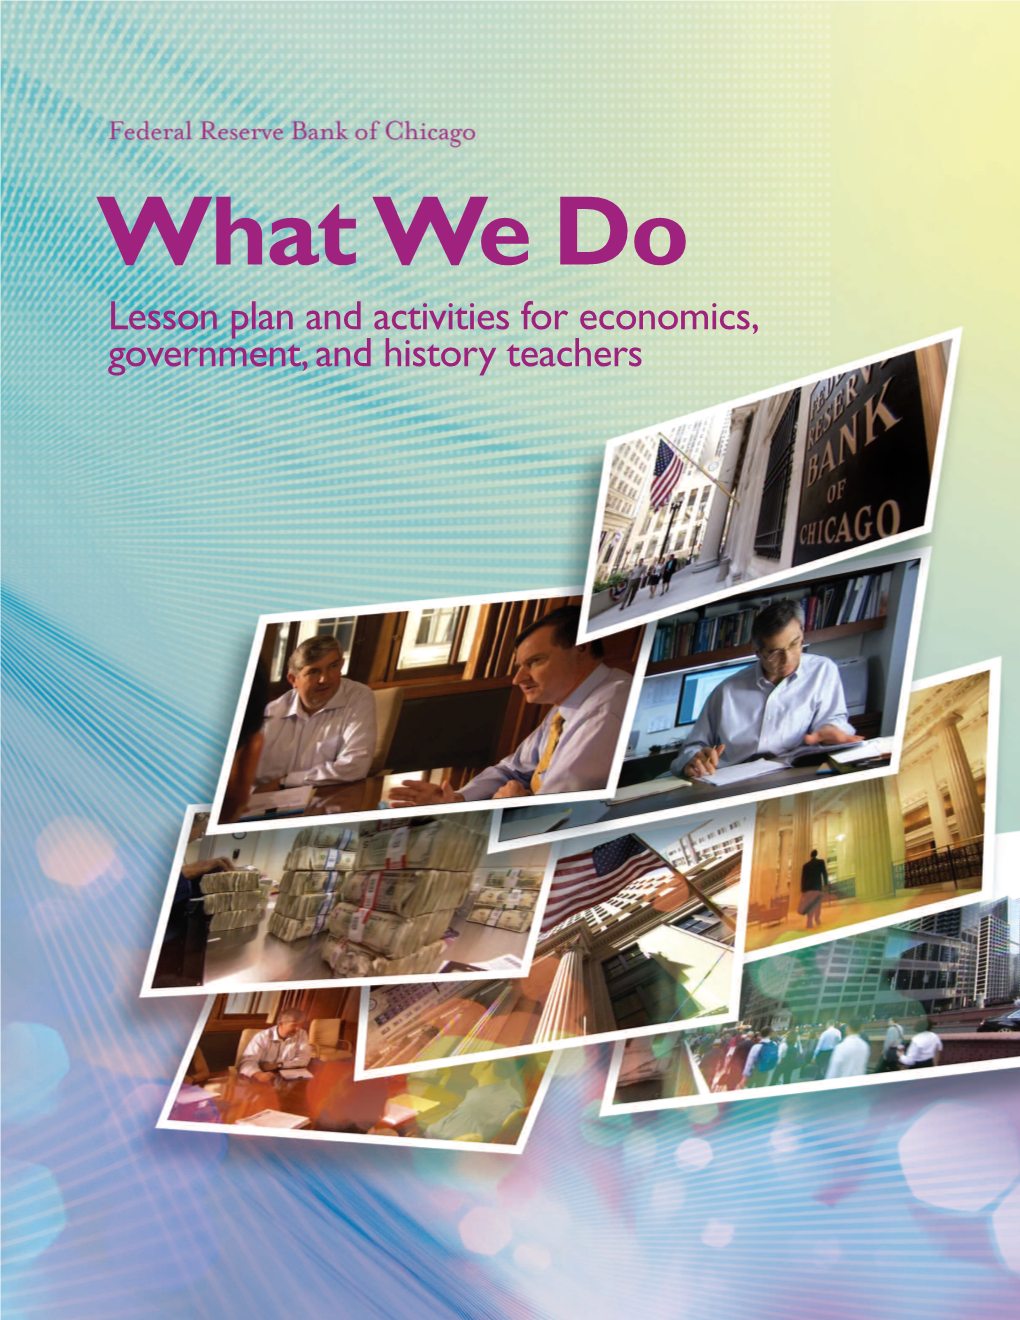 What We Do Lesson Pl an and Activities for Economics, Government, and History Teachers